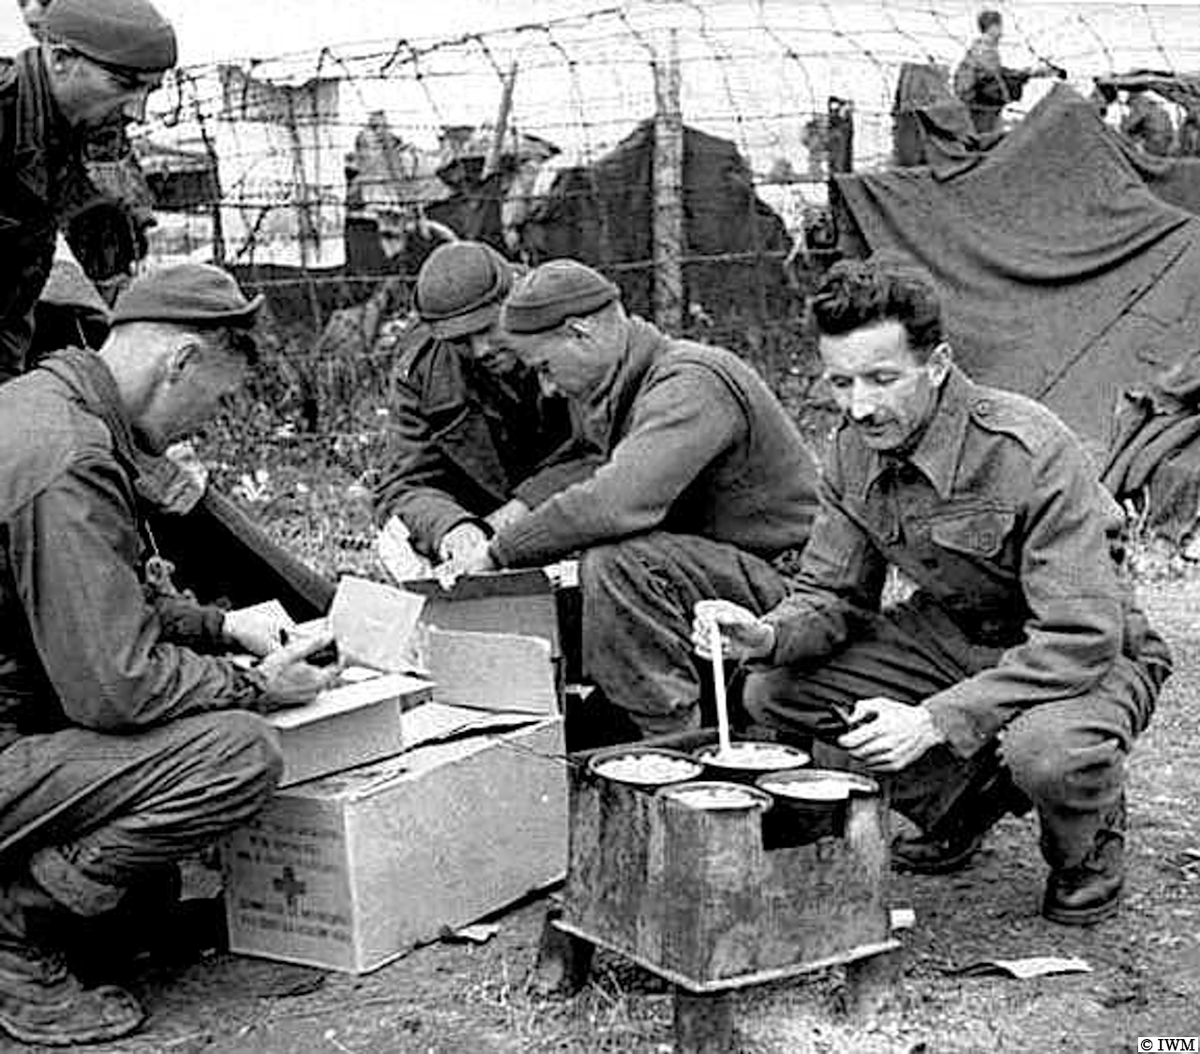 #OTD in 1945, Stalag 7A. Germany. A former British POW cooking food on a homemade stove and Americans examining food parcels. #WW2 #HISTORY